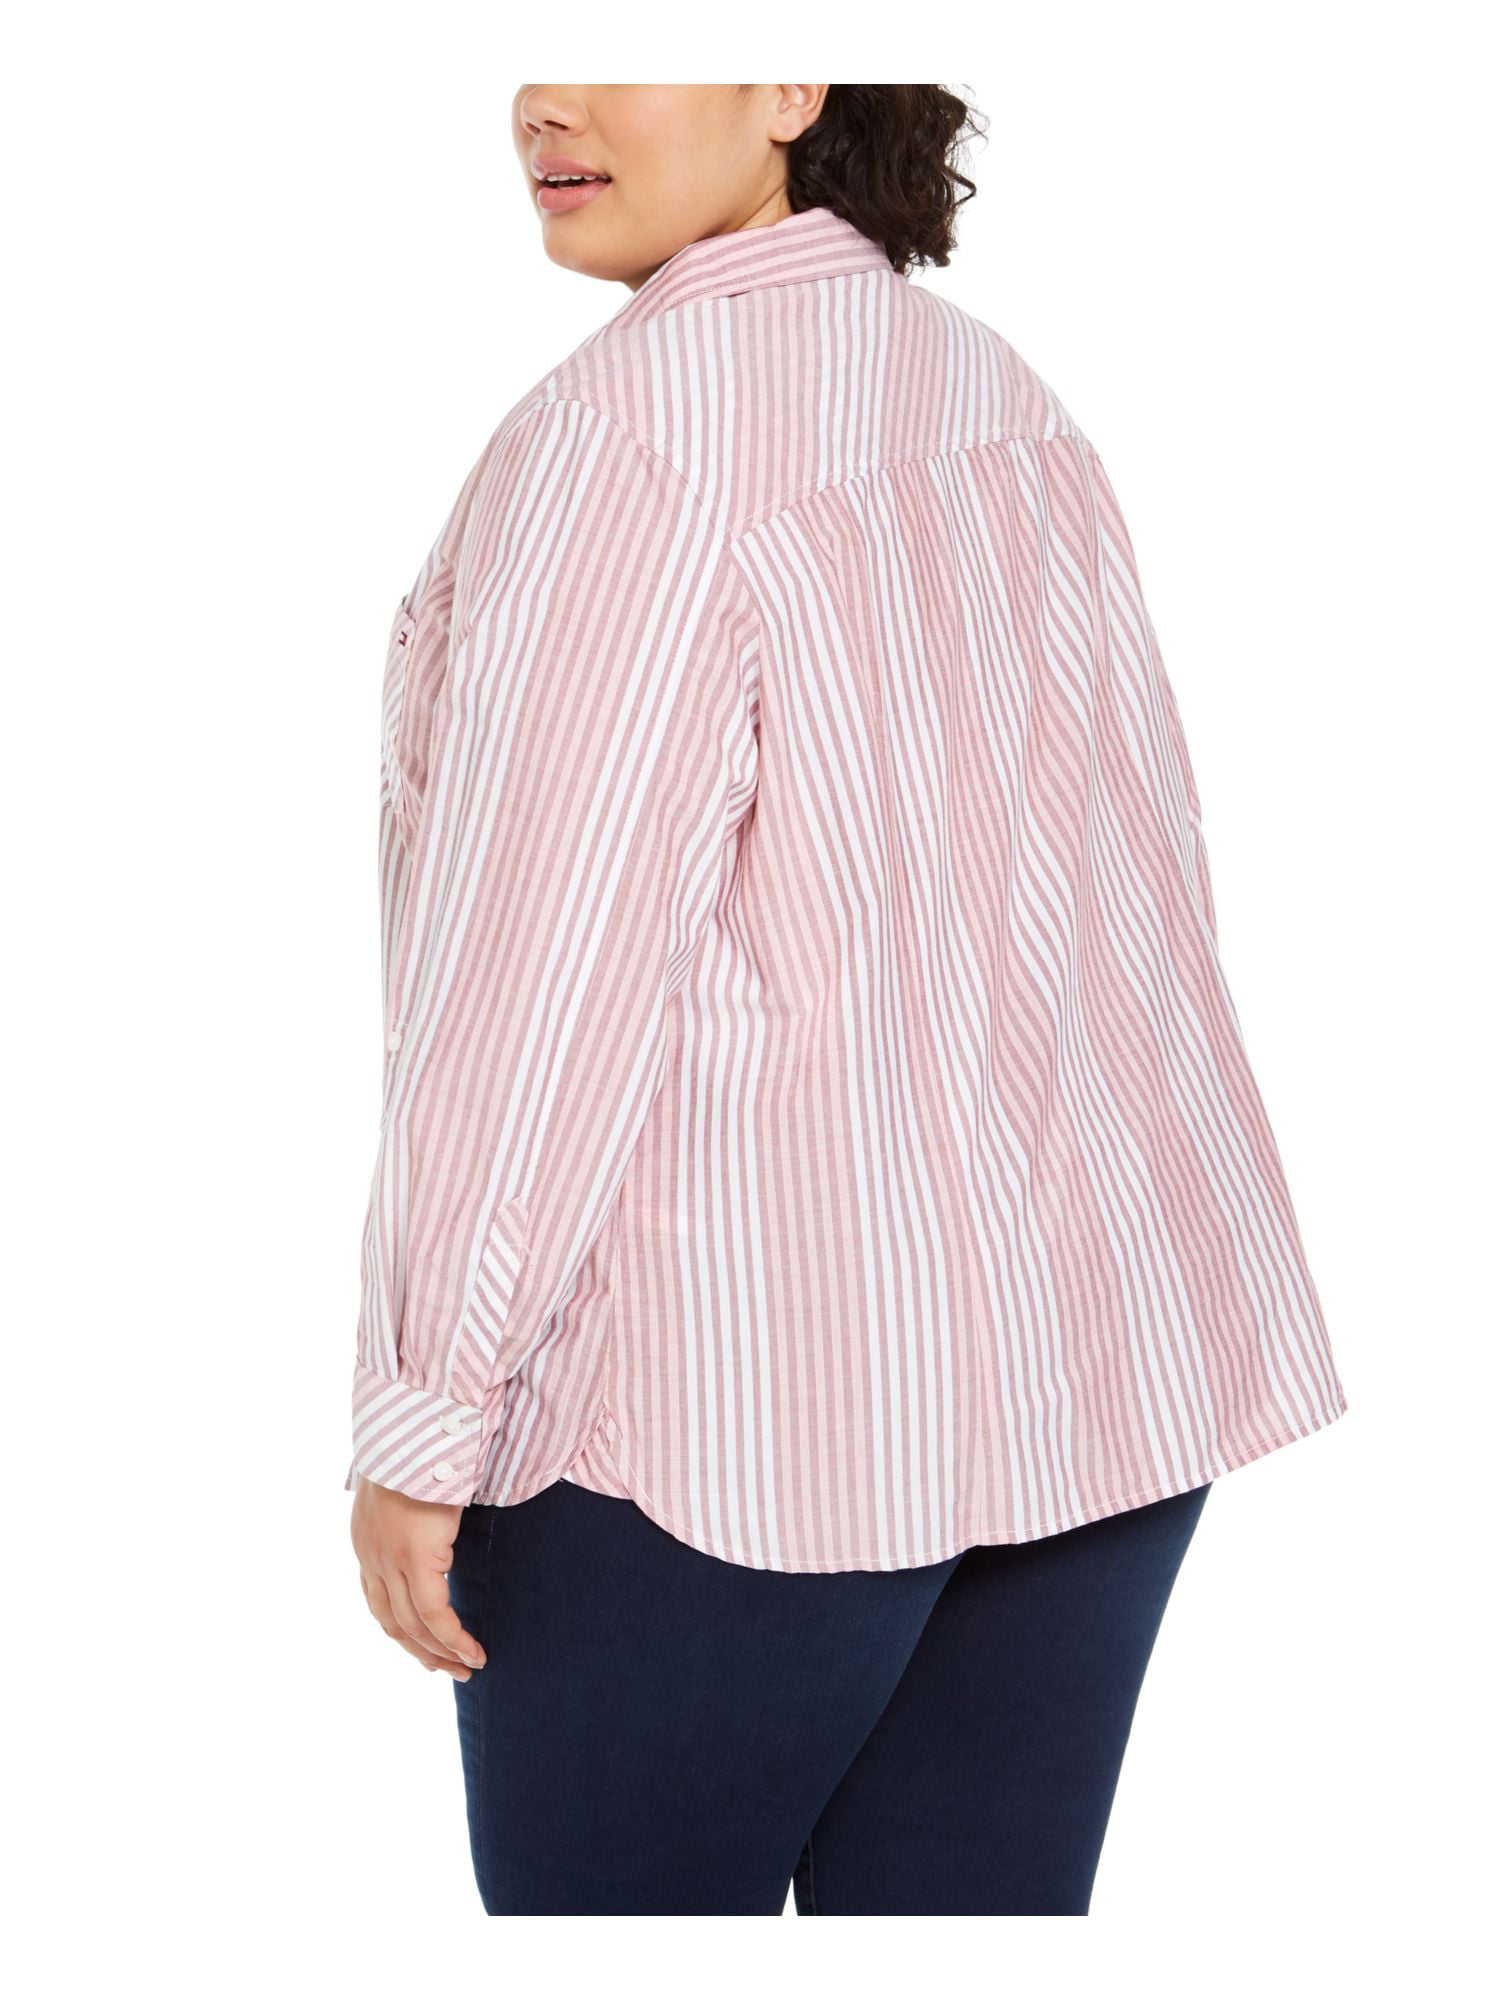 TOMMY HILFIGER Womens Pink Striped 3/4 Sleeve Collared Button Up Top Plus  0X